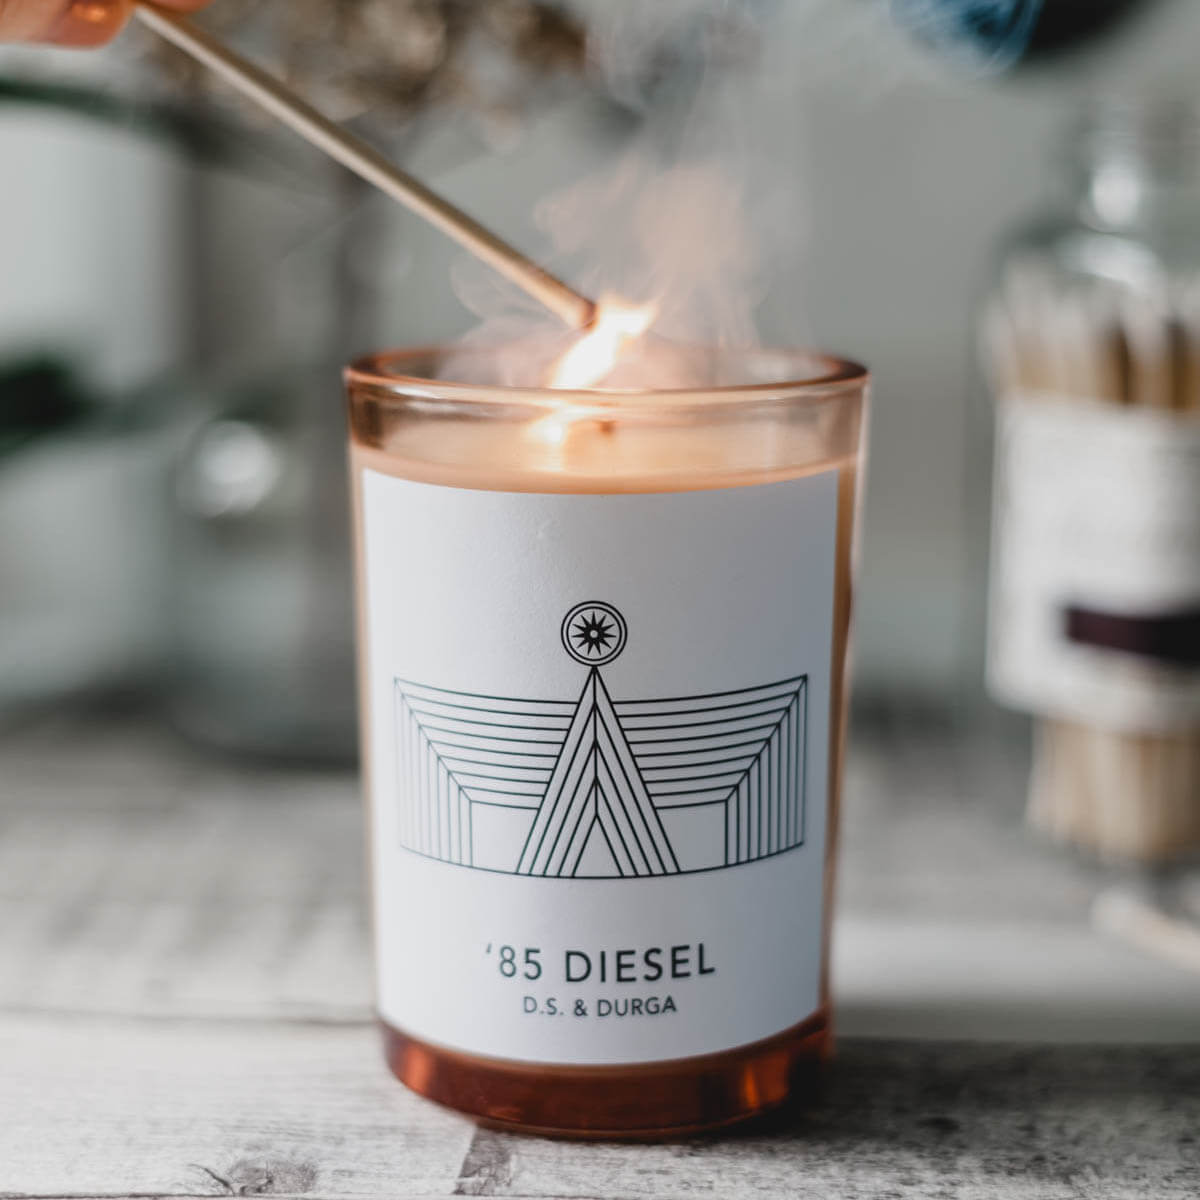 D.S. & DURGA '85 Diesel Scented Candle